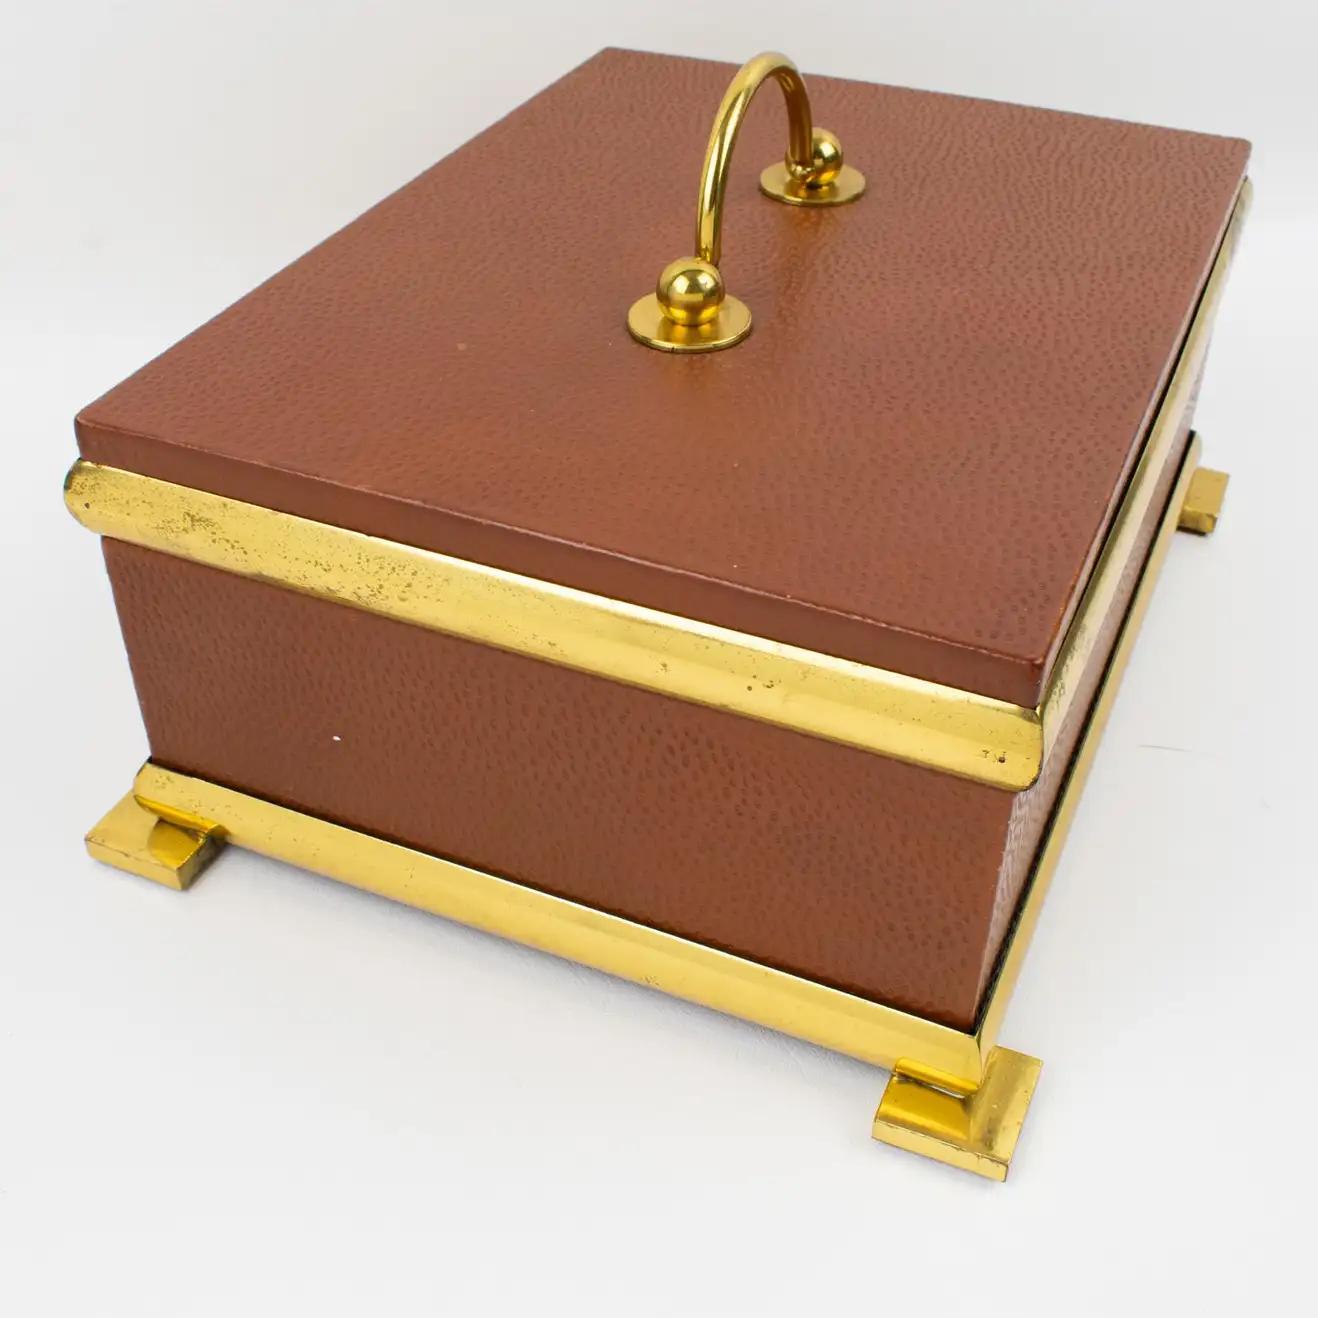 Italian Leather and Brass Decorative Box, 1950s Empire Style For Sale 4